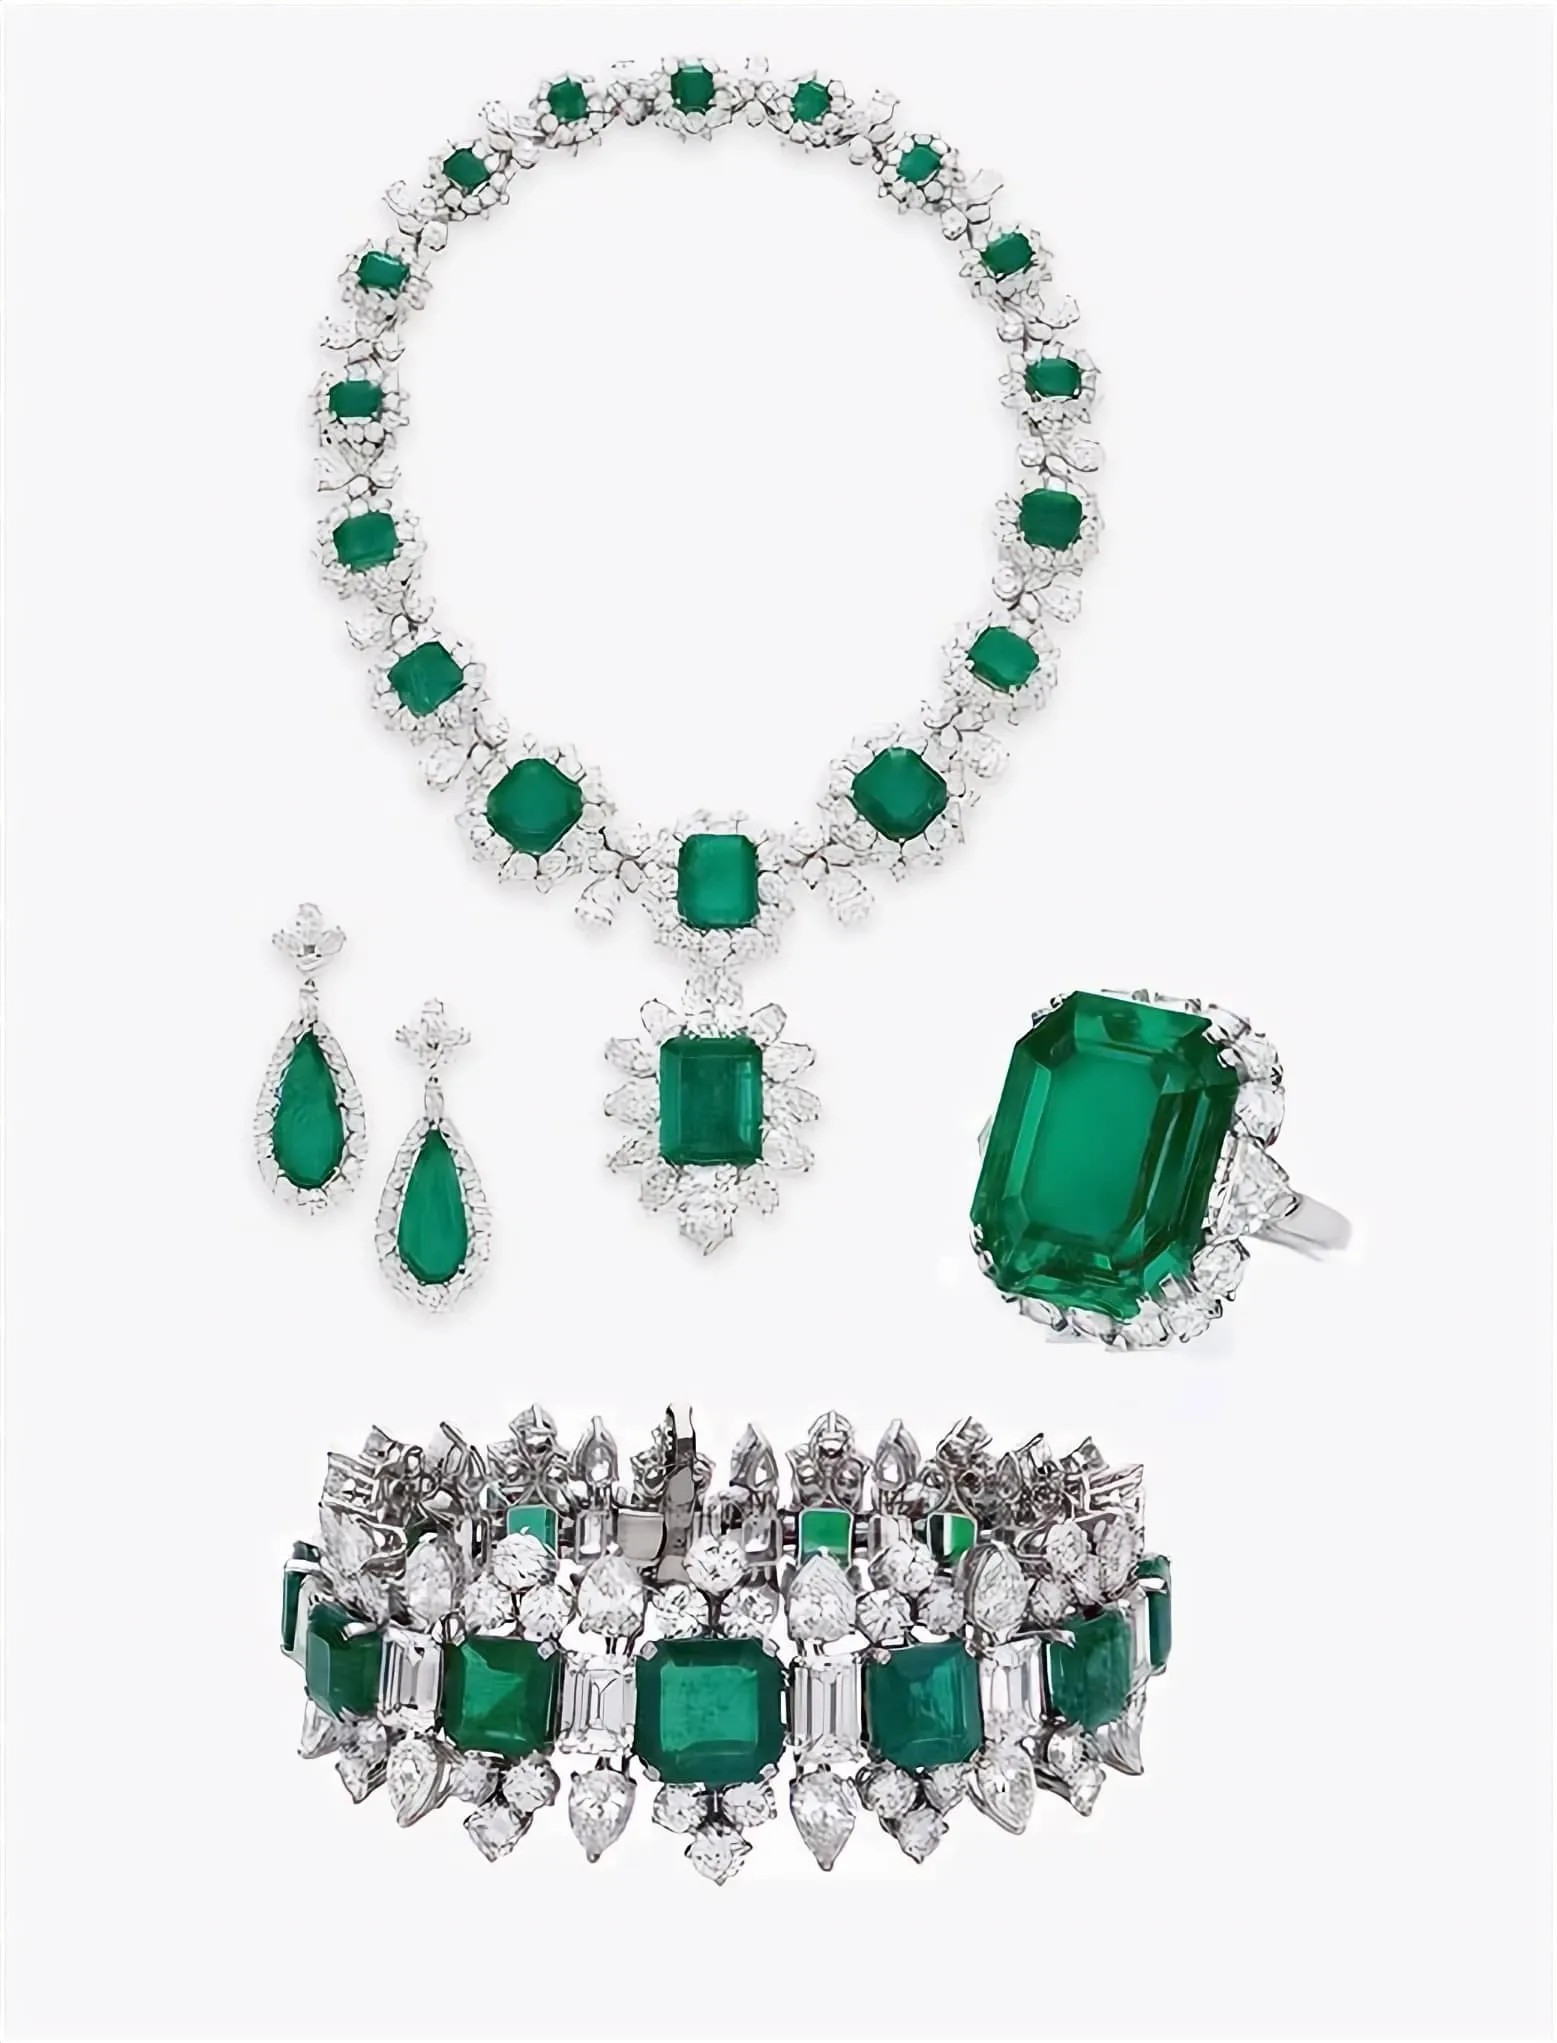 Diamond and Emerald Necklace with Earrings, Bracelet and Ring